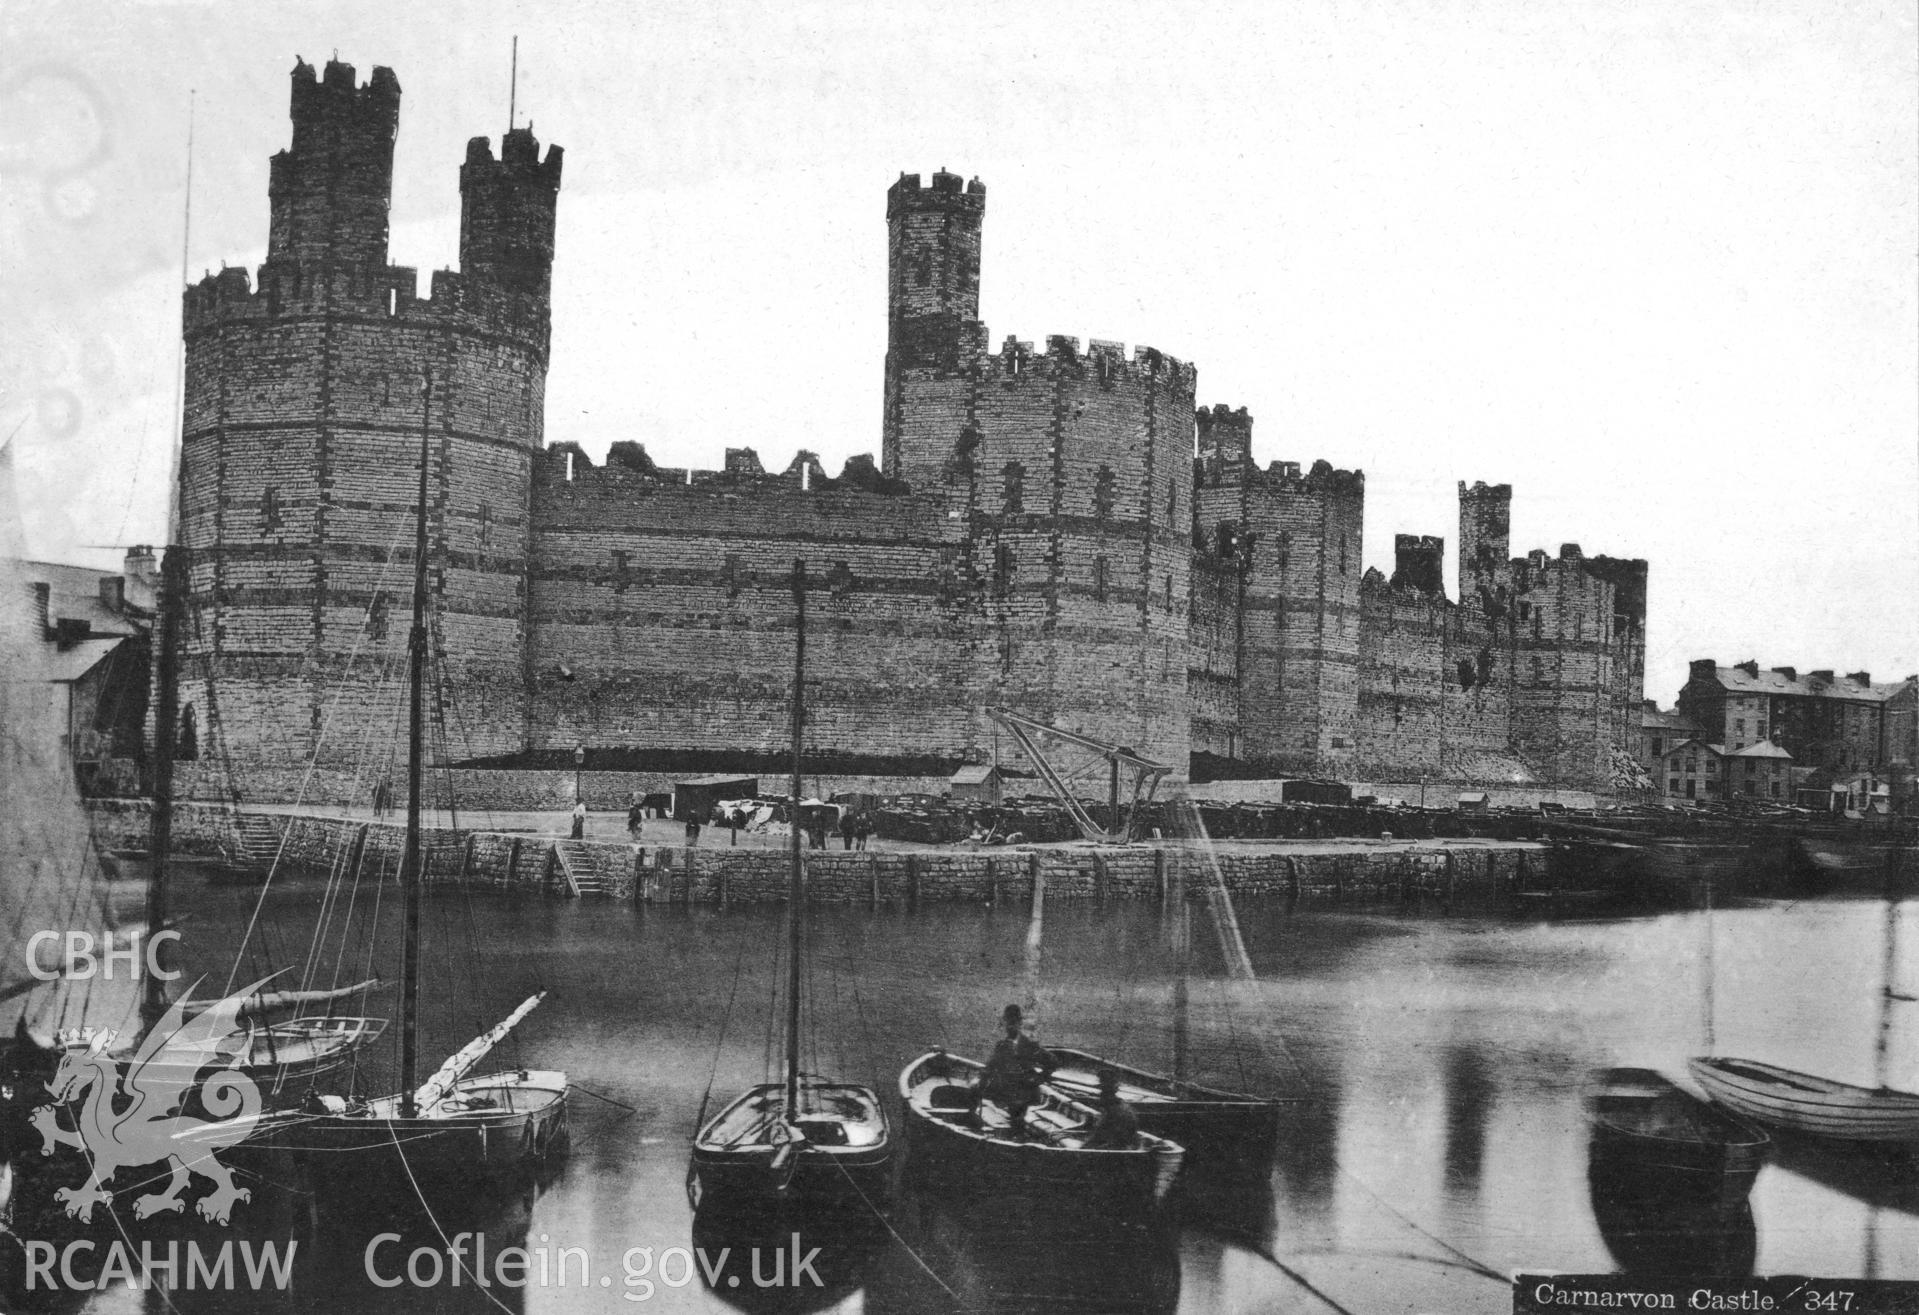 Undated black and white photograph of Caernarfon Castle, also visible in the background are the steps of the ferry and to the fore is the ferry with ferryman onboard alongside other rowing and sailing craft.